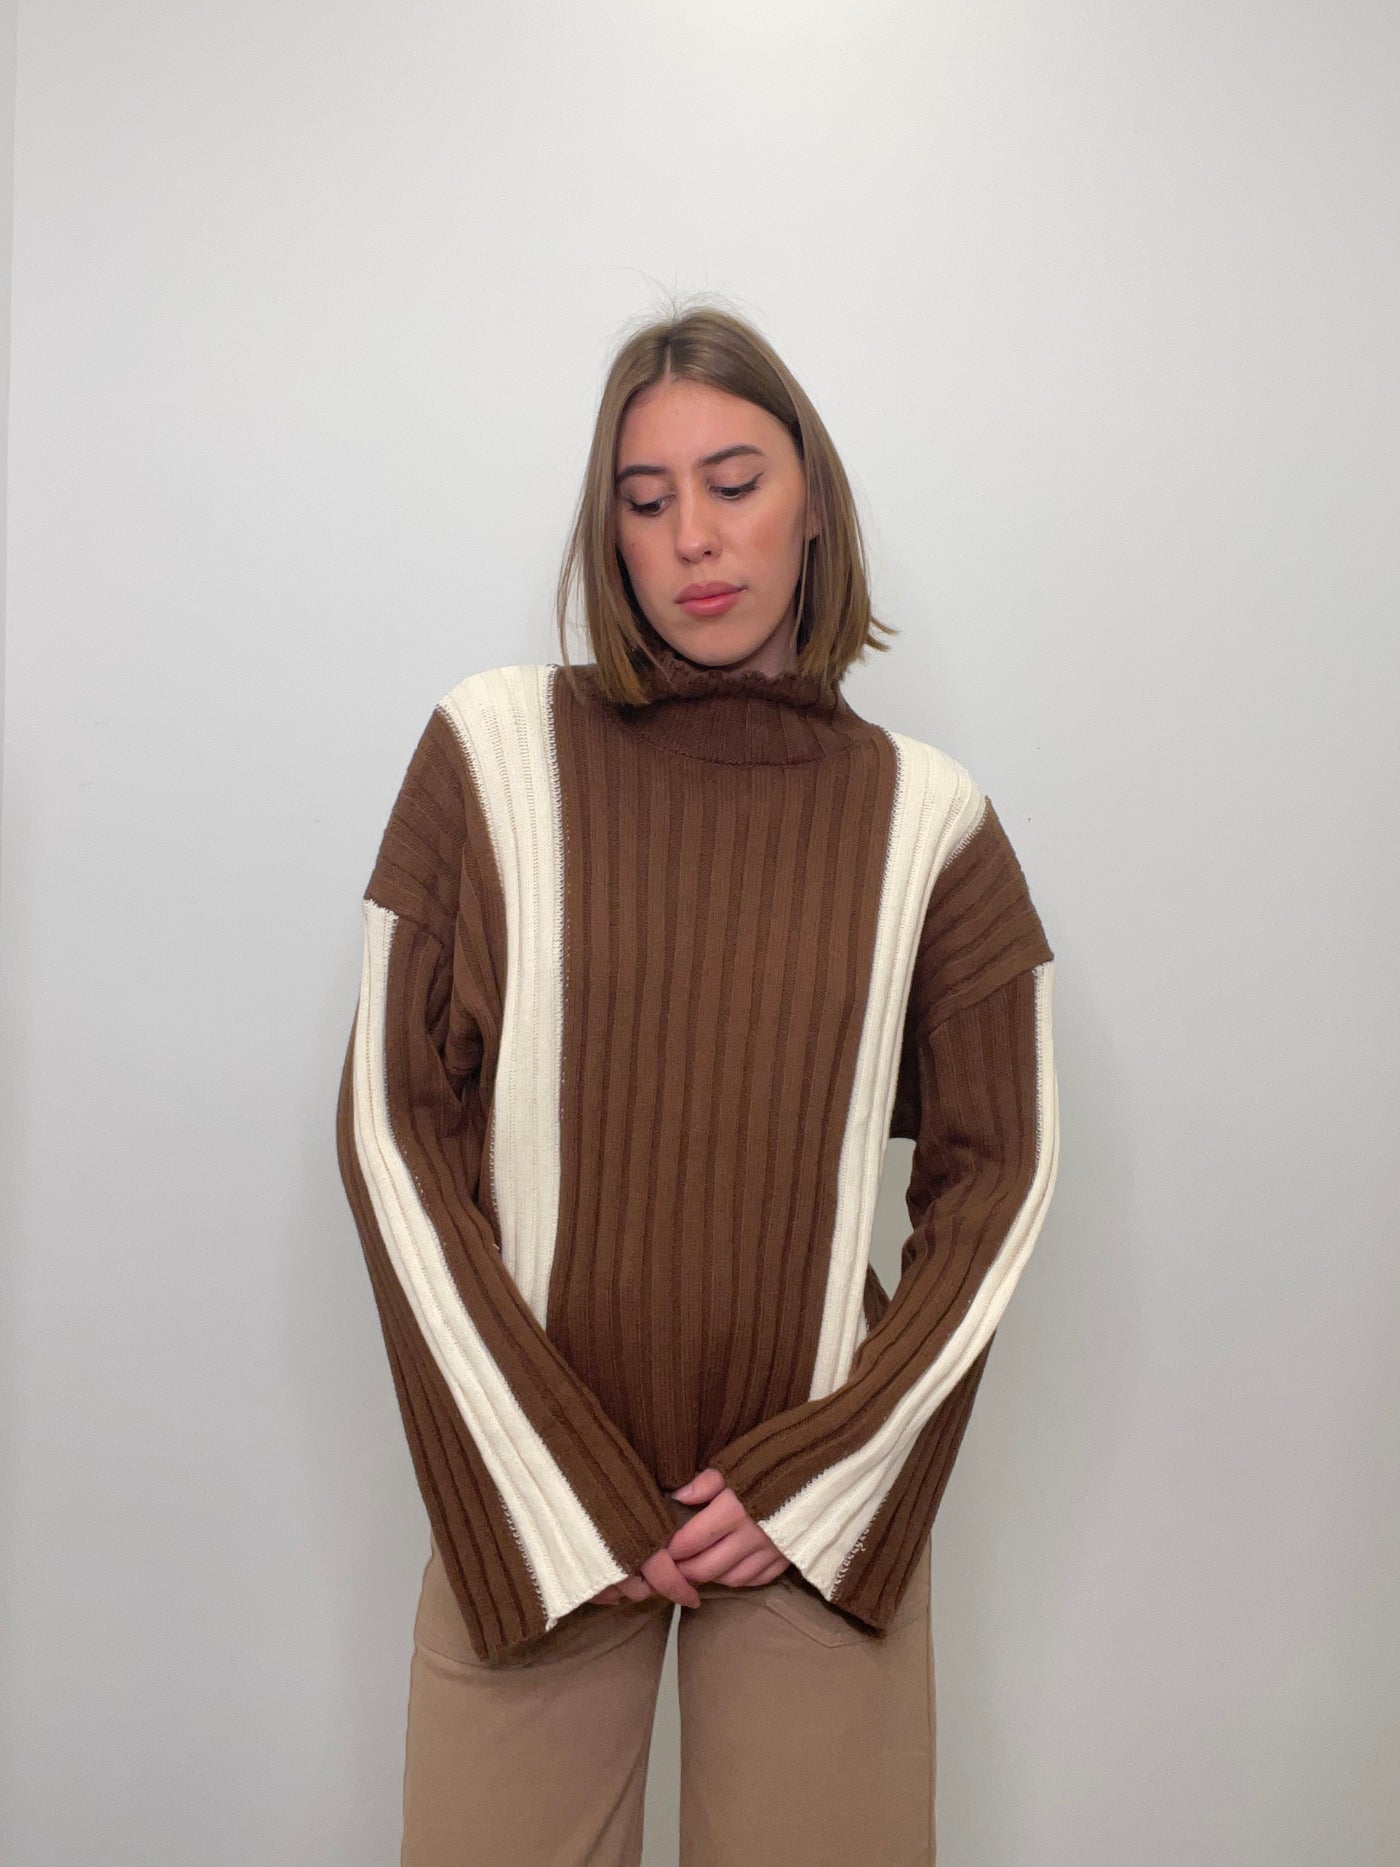 Ridley Ribbed Sweater